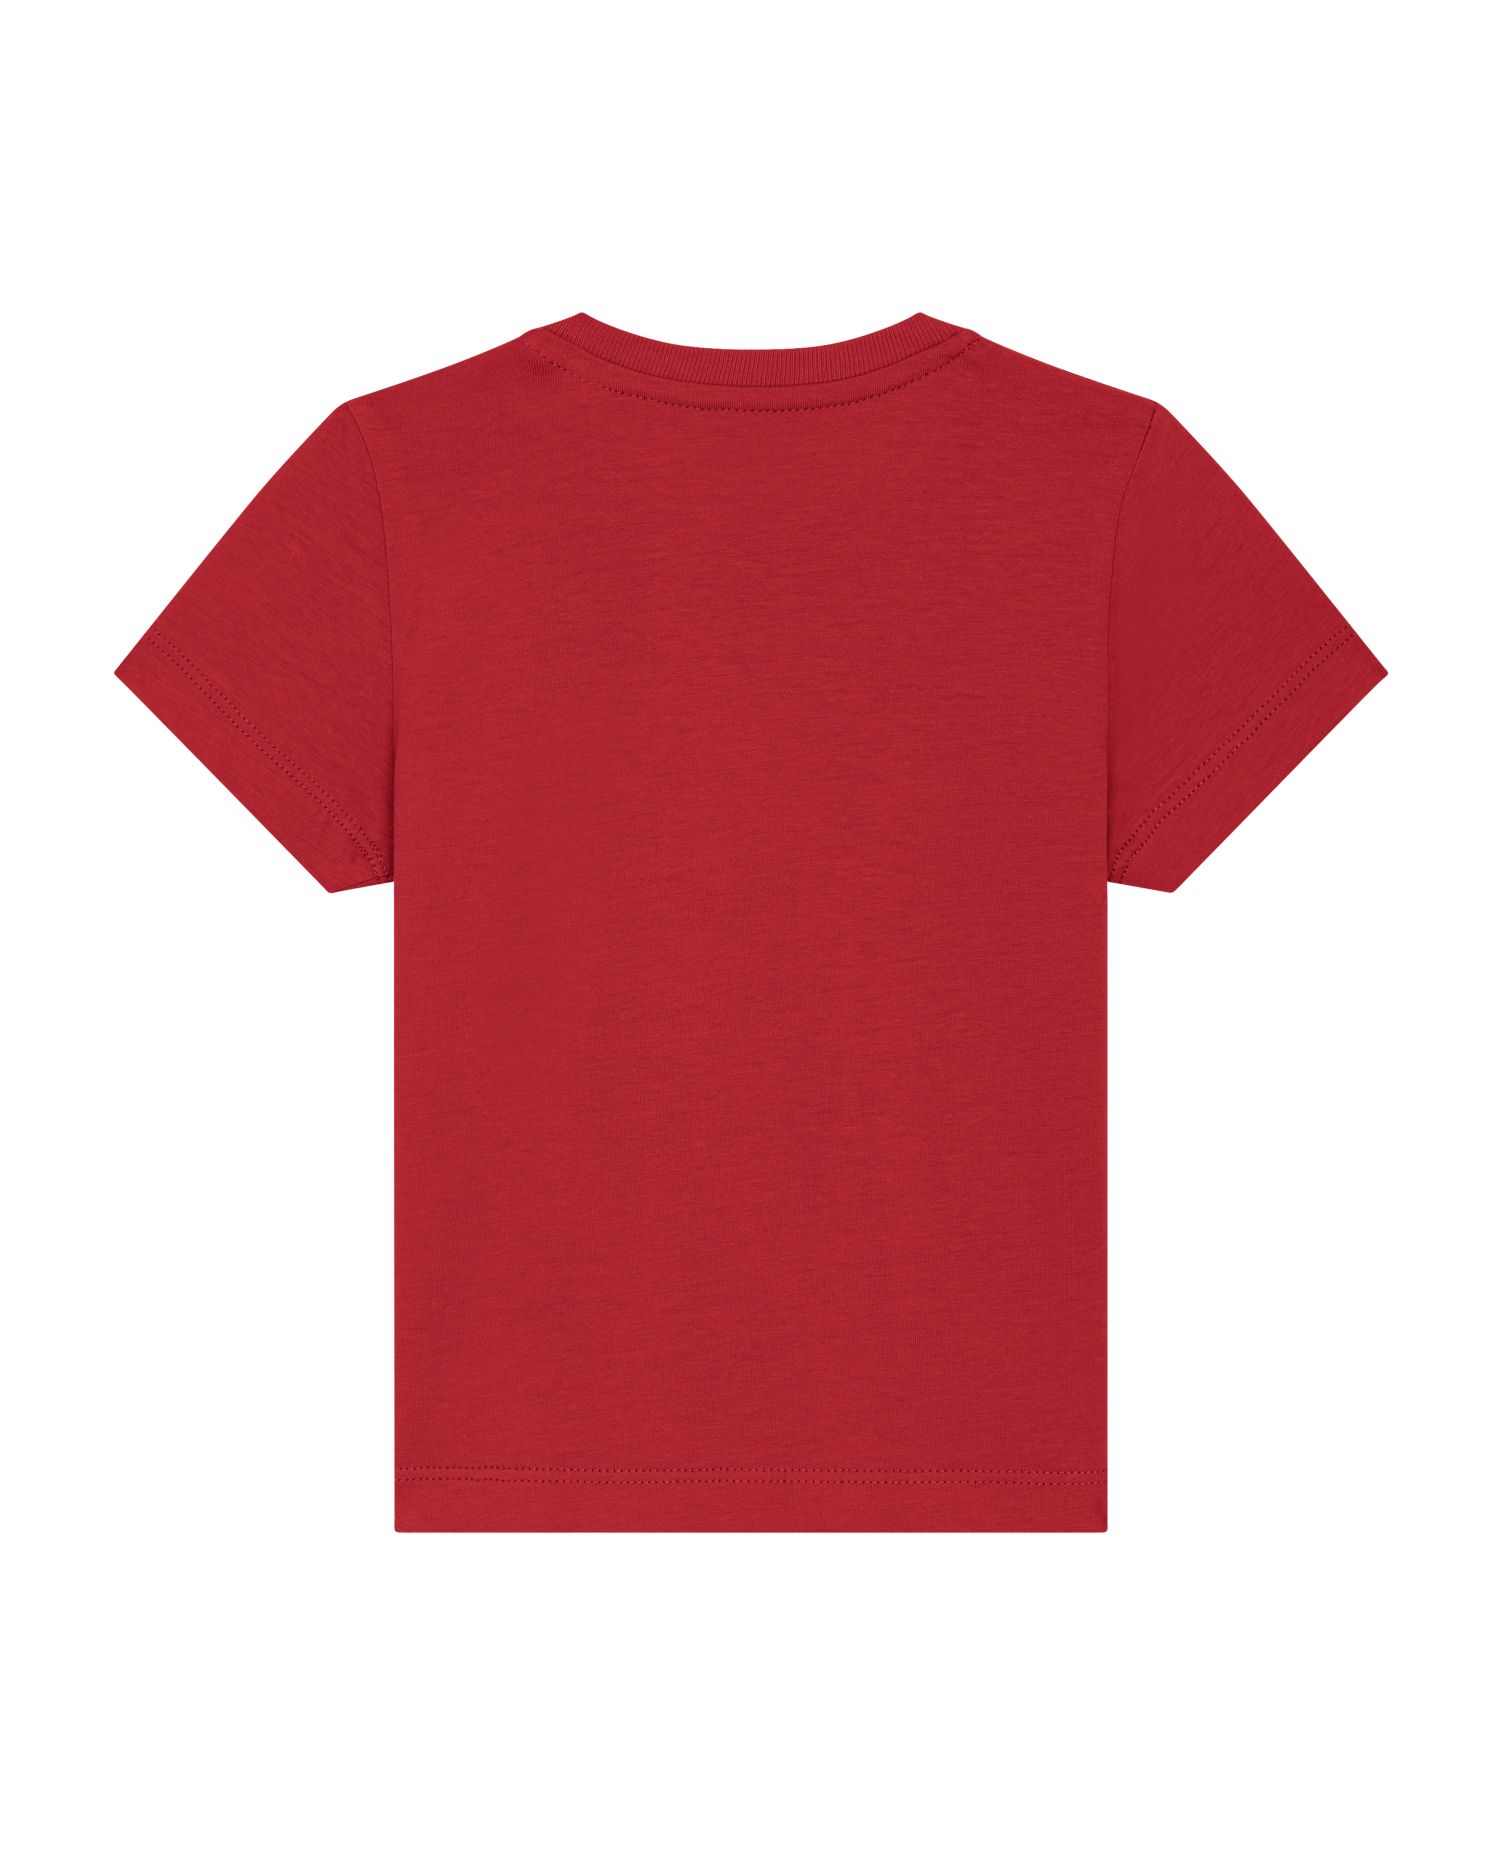 T-Shirt Baby Creator in Farbe Red